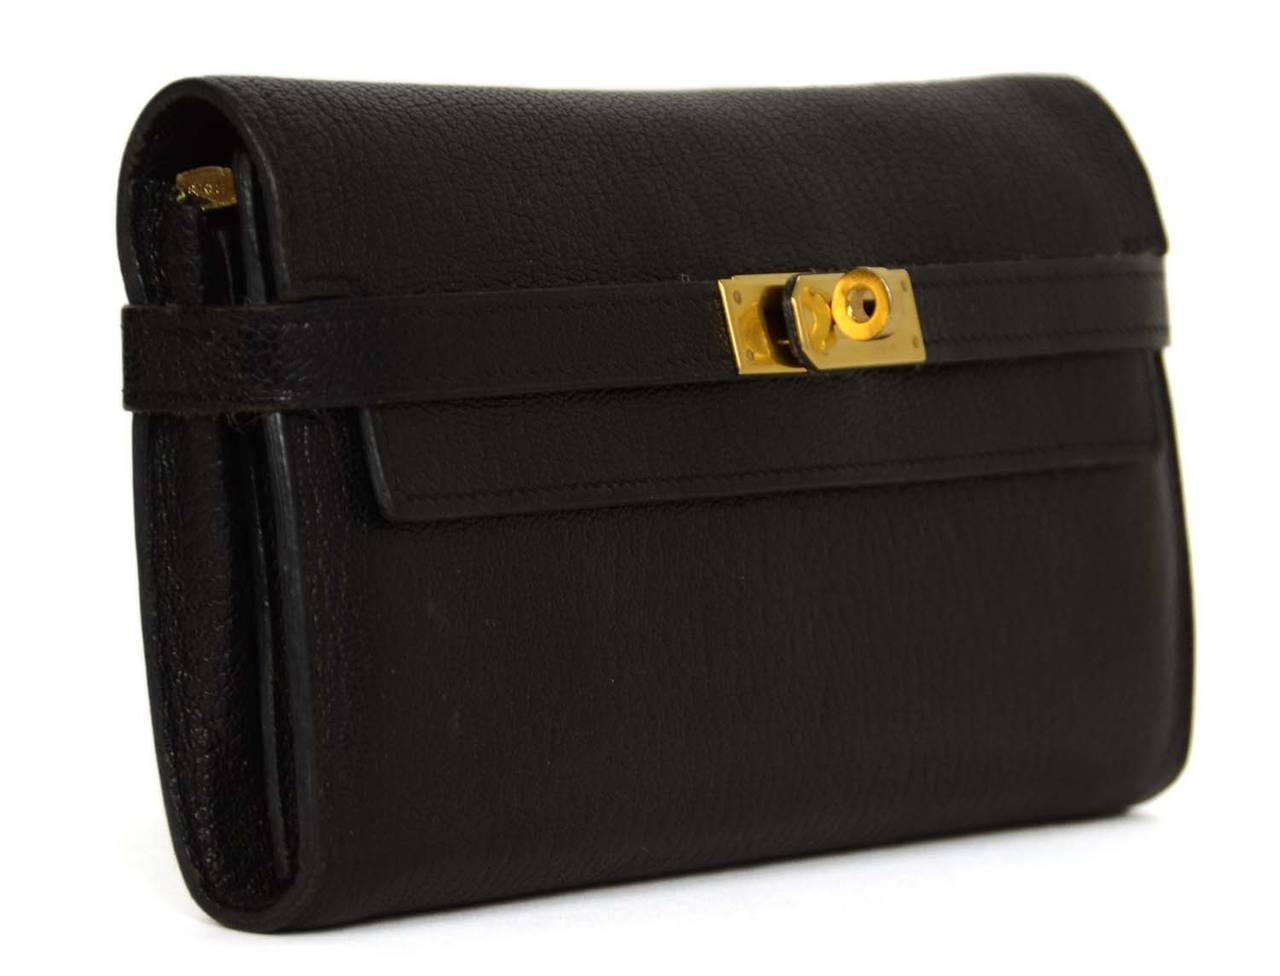 Hermes Black Chevre Kelly Wallet

    Made in: France
    Year of Production: 2008
    Color: Black and goldtone
    Hardware: Goldtone
    Materials: Chevre leather and metal
    Lining: Black chevre leather
    Closure/opening: Flap top